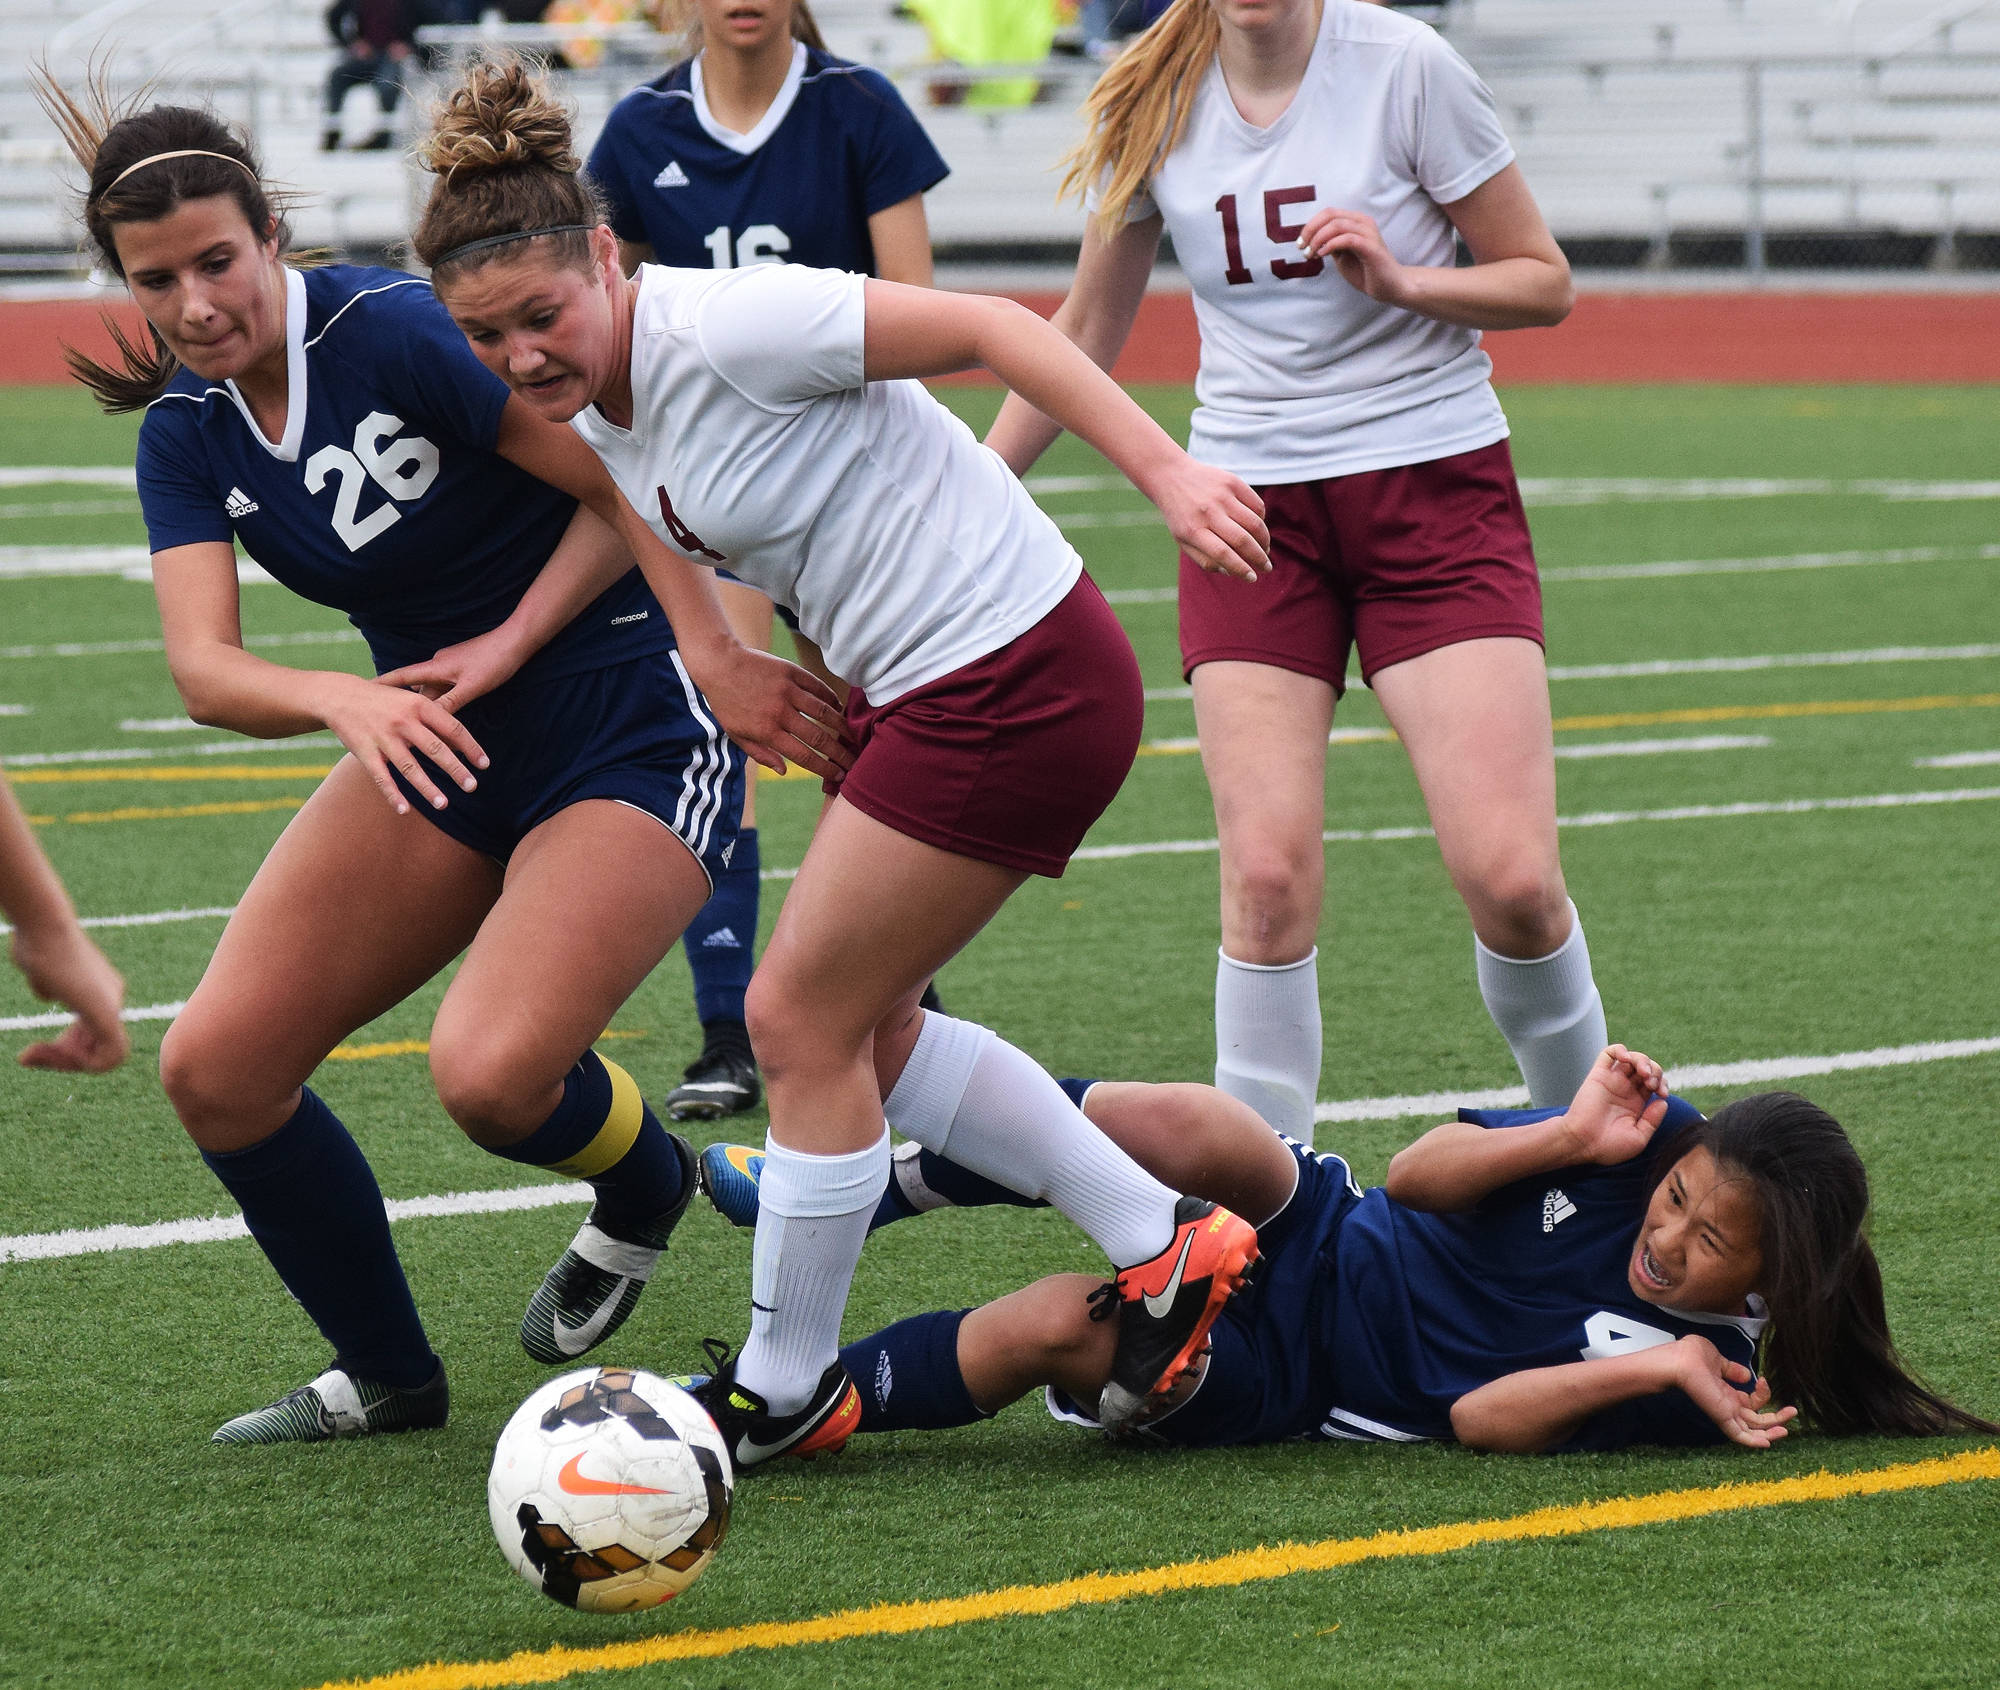 Soldotna’s Meijan Leaf (on ground) protects herself from an aggressive attack by Grace Christian’s Maddy Morgan and Soldotna’s Whitney Wortham (26) Friday in a Division II state tournament semifinal at Service High School. (Photo by Joey Klecka/Peninsula Clarion)